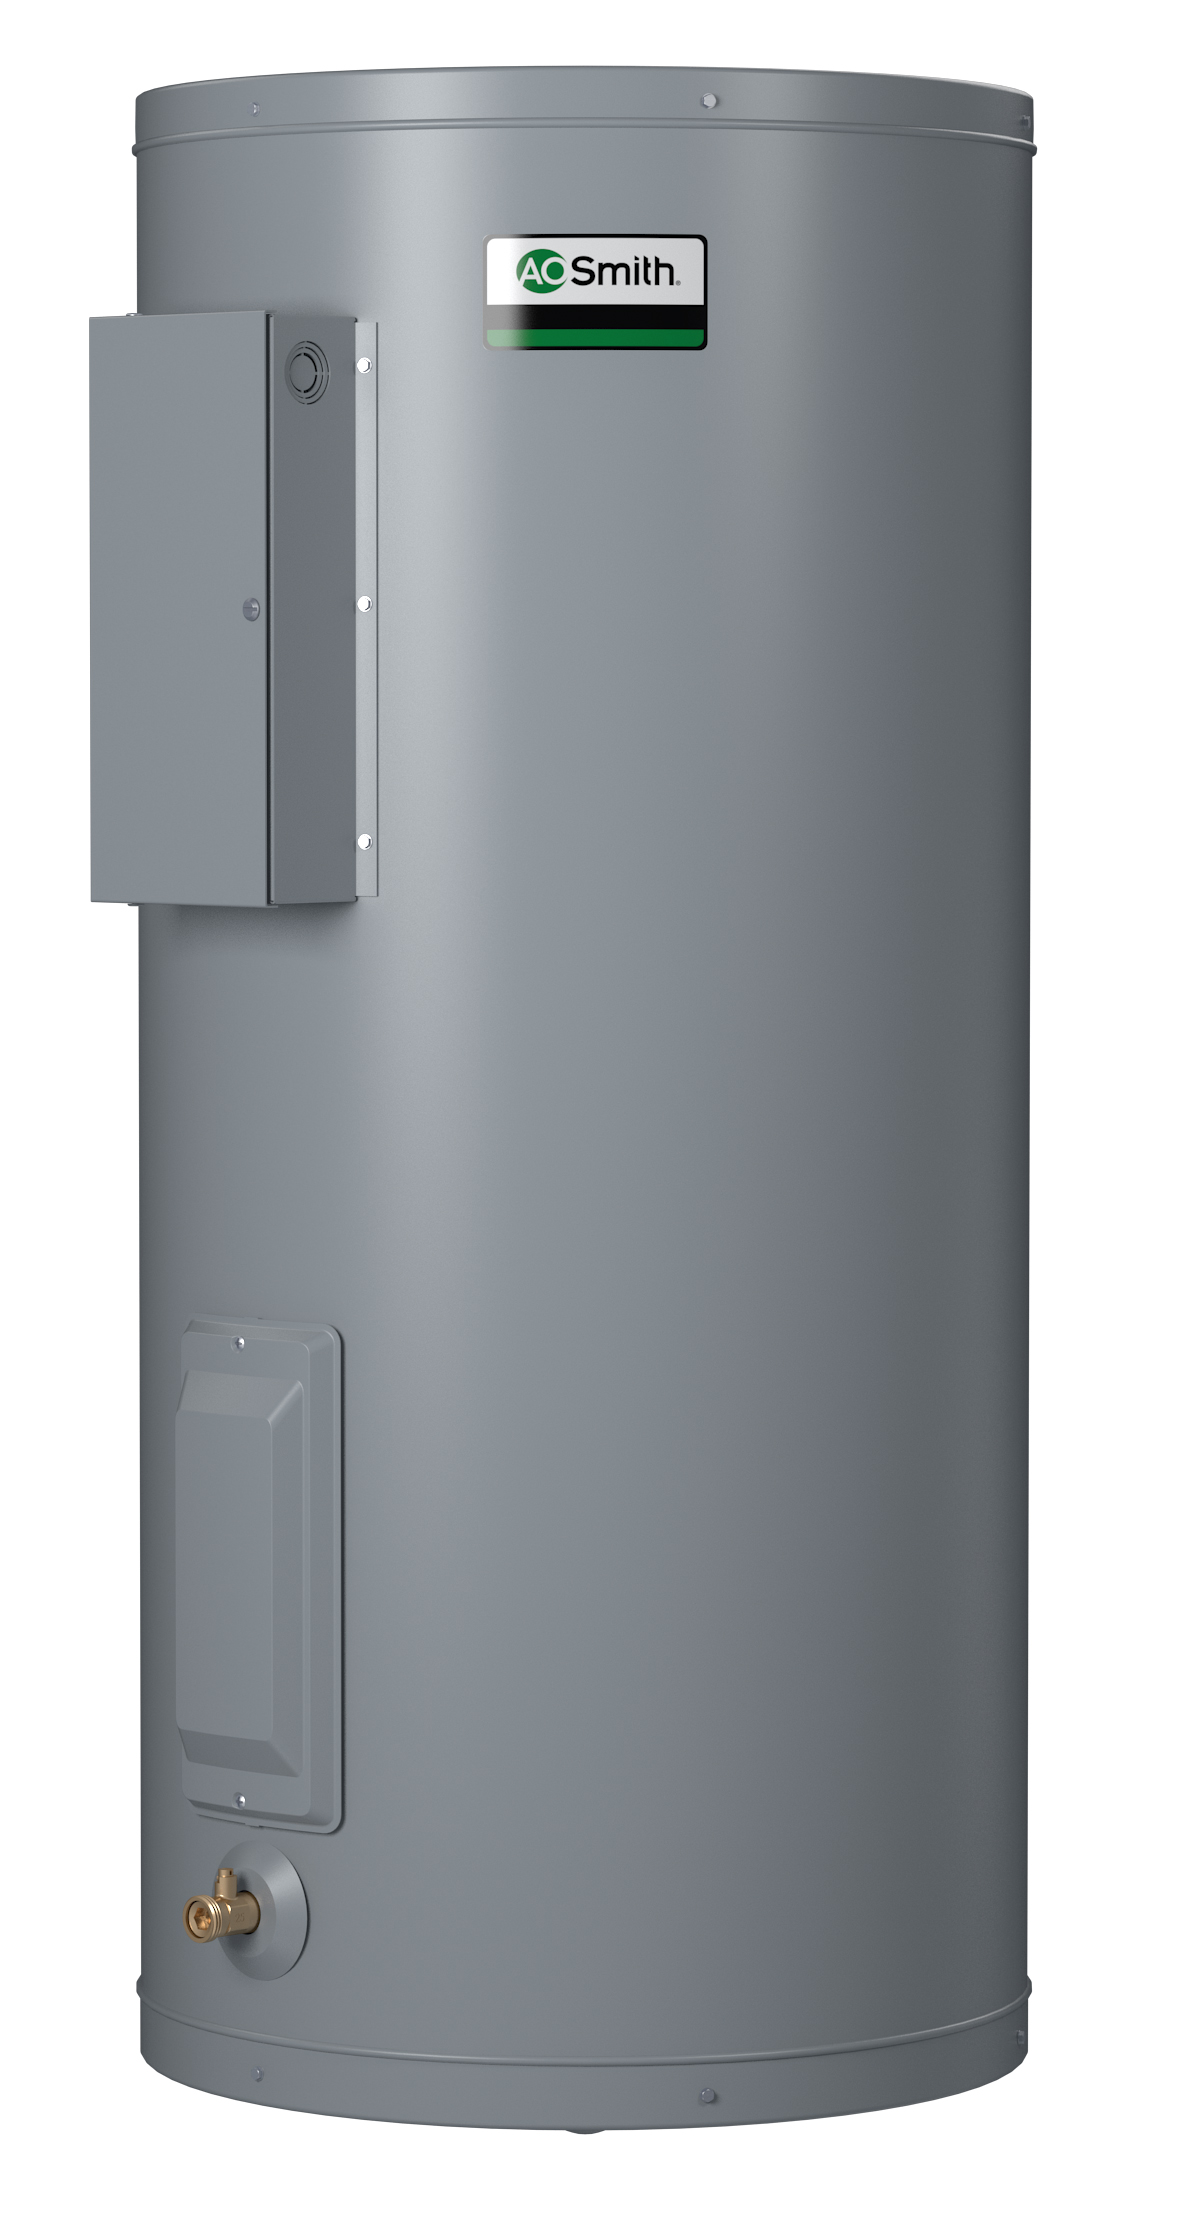 AO SMITH DEN-120D: 120 GALLONS, 5.0KW, 480 VOLT, 1 PHASE, (2-5000 WATT ELEMENTS, NON-SIMULTANEOUS WIRING), DURA-POWER, LIGHT DUTY COMMERCIAL ELECTRIC WATER HEATER